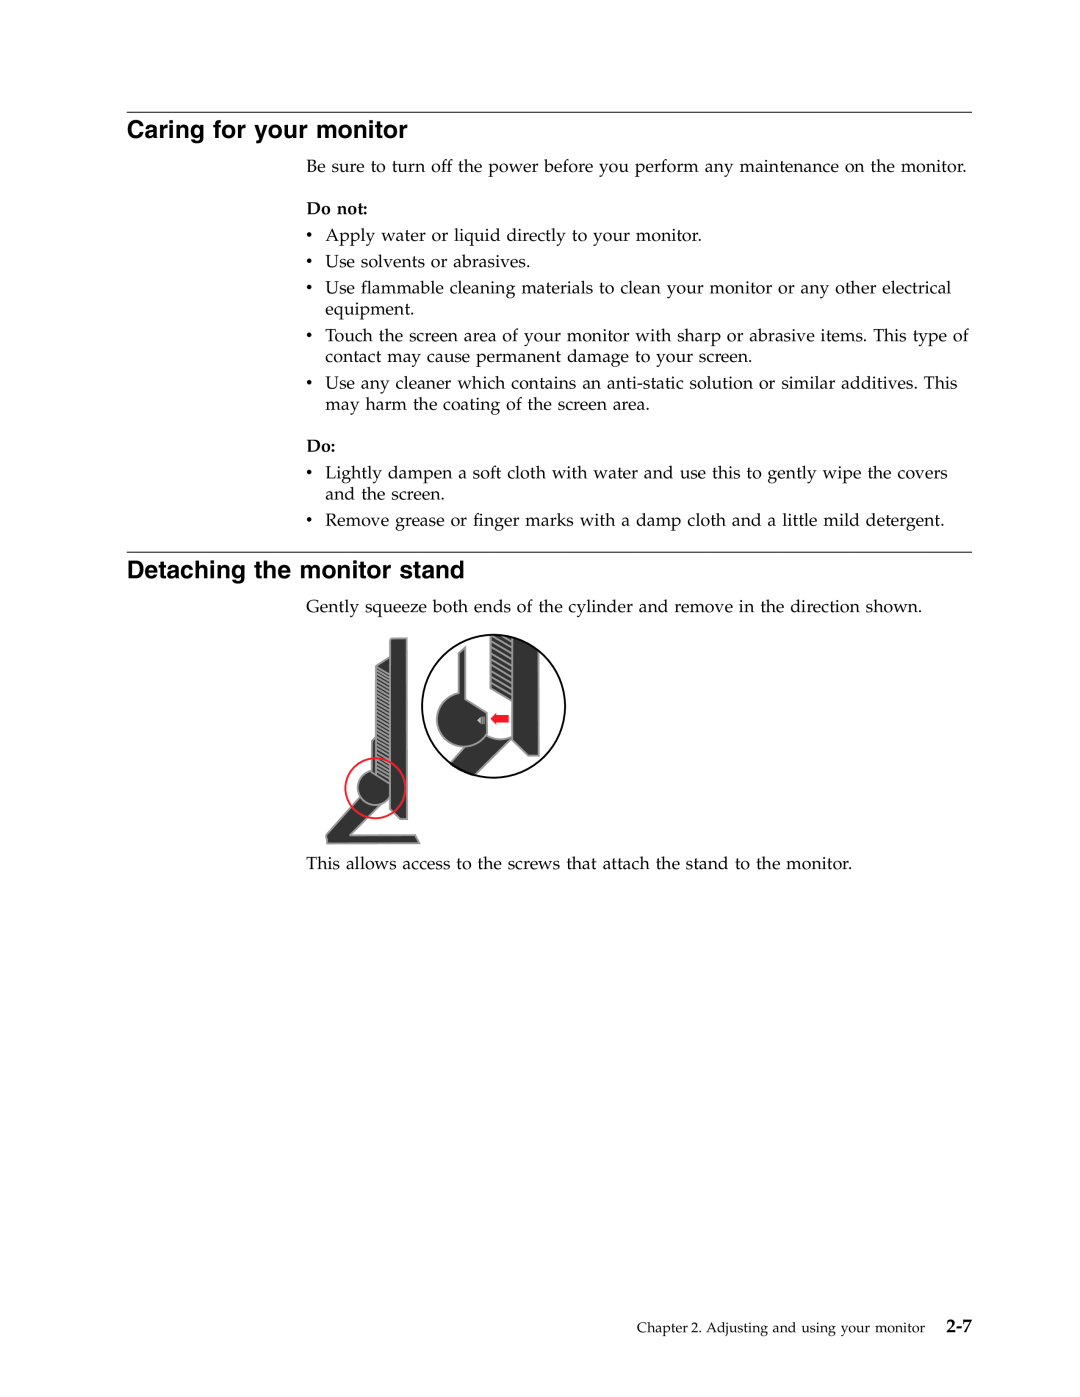 Lenovo 4428-AB1 manual Caring for your monitor, Detaching the monitor stand, Do not 